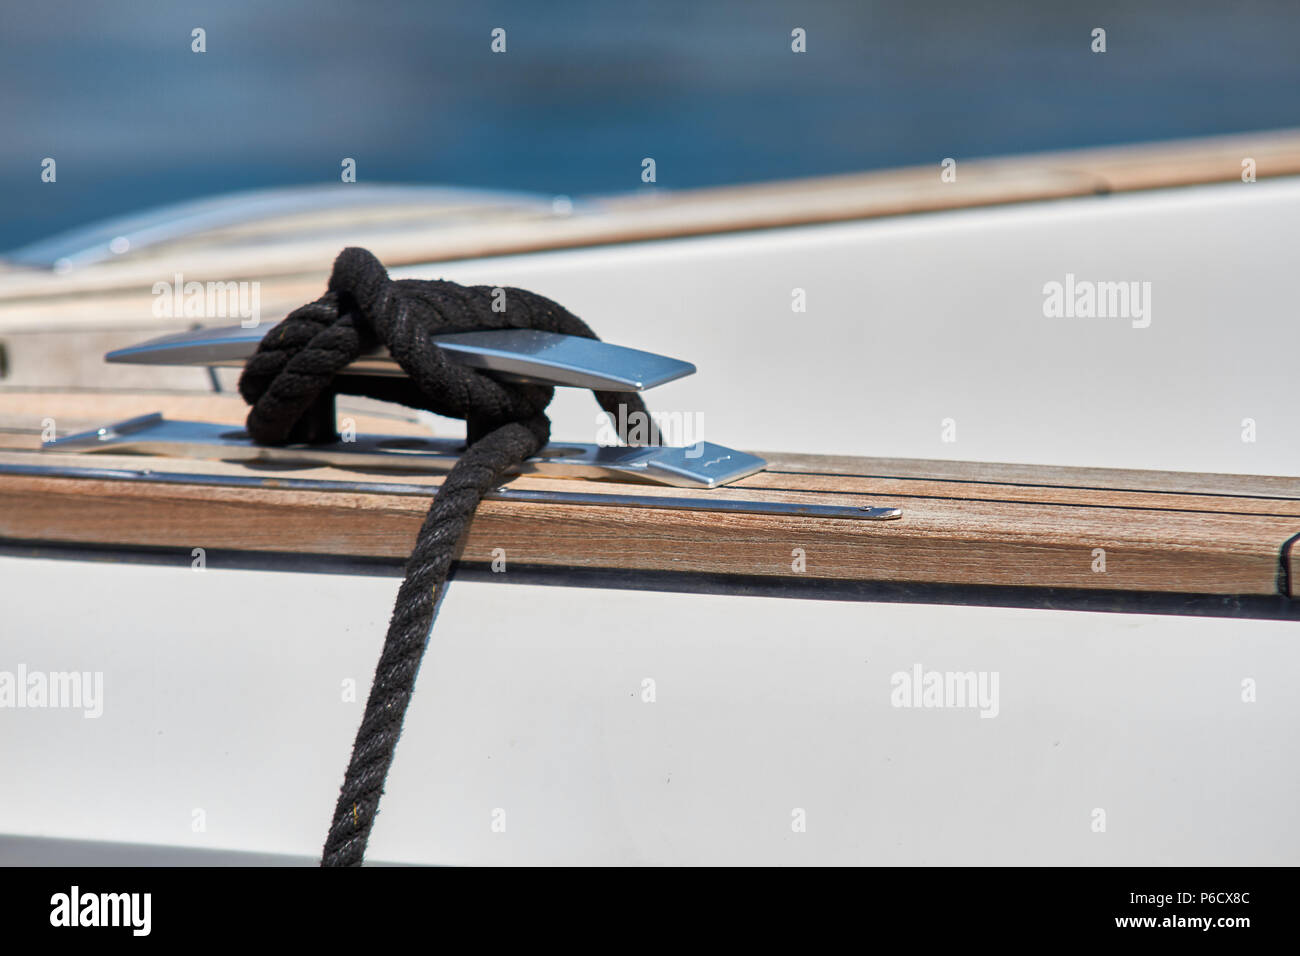 Yatch knot in the marine Stock Photo